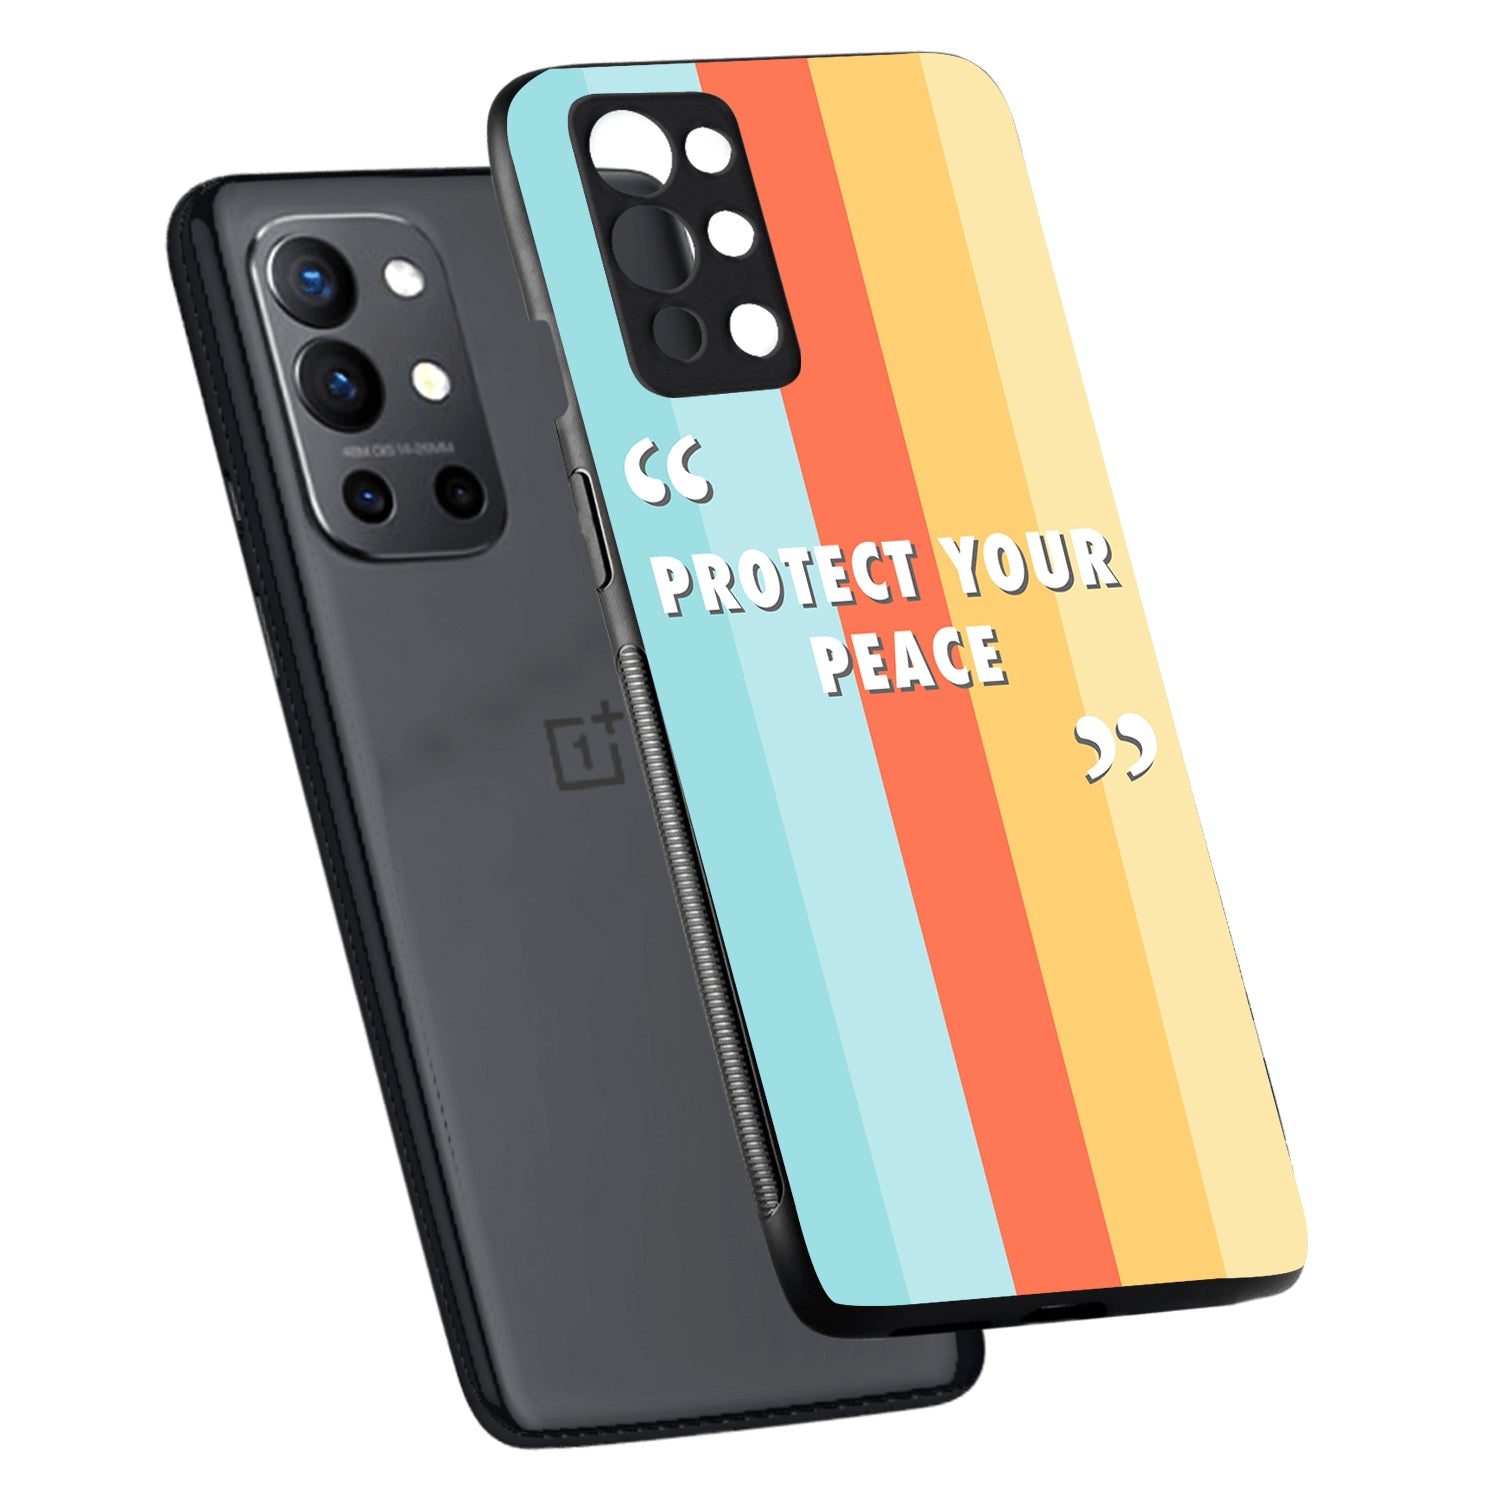 Protect your peace Motivational Quotes Oneplus 9 Pro Back Case